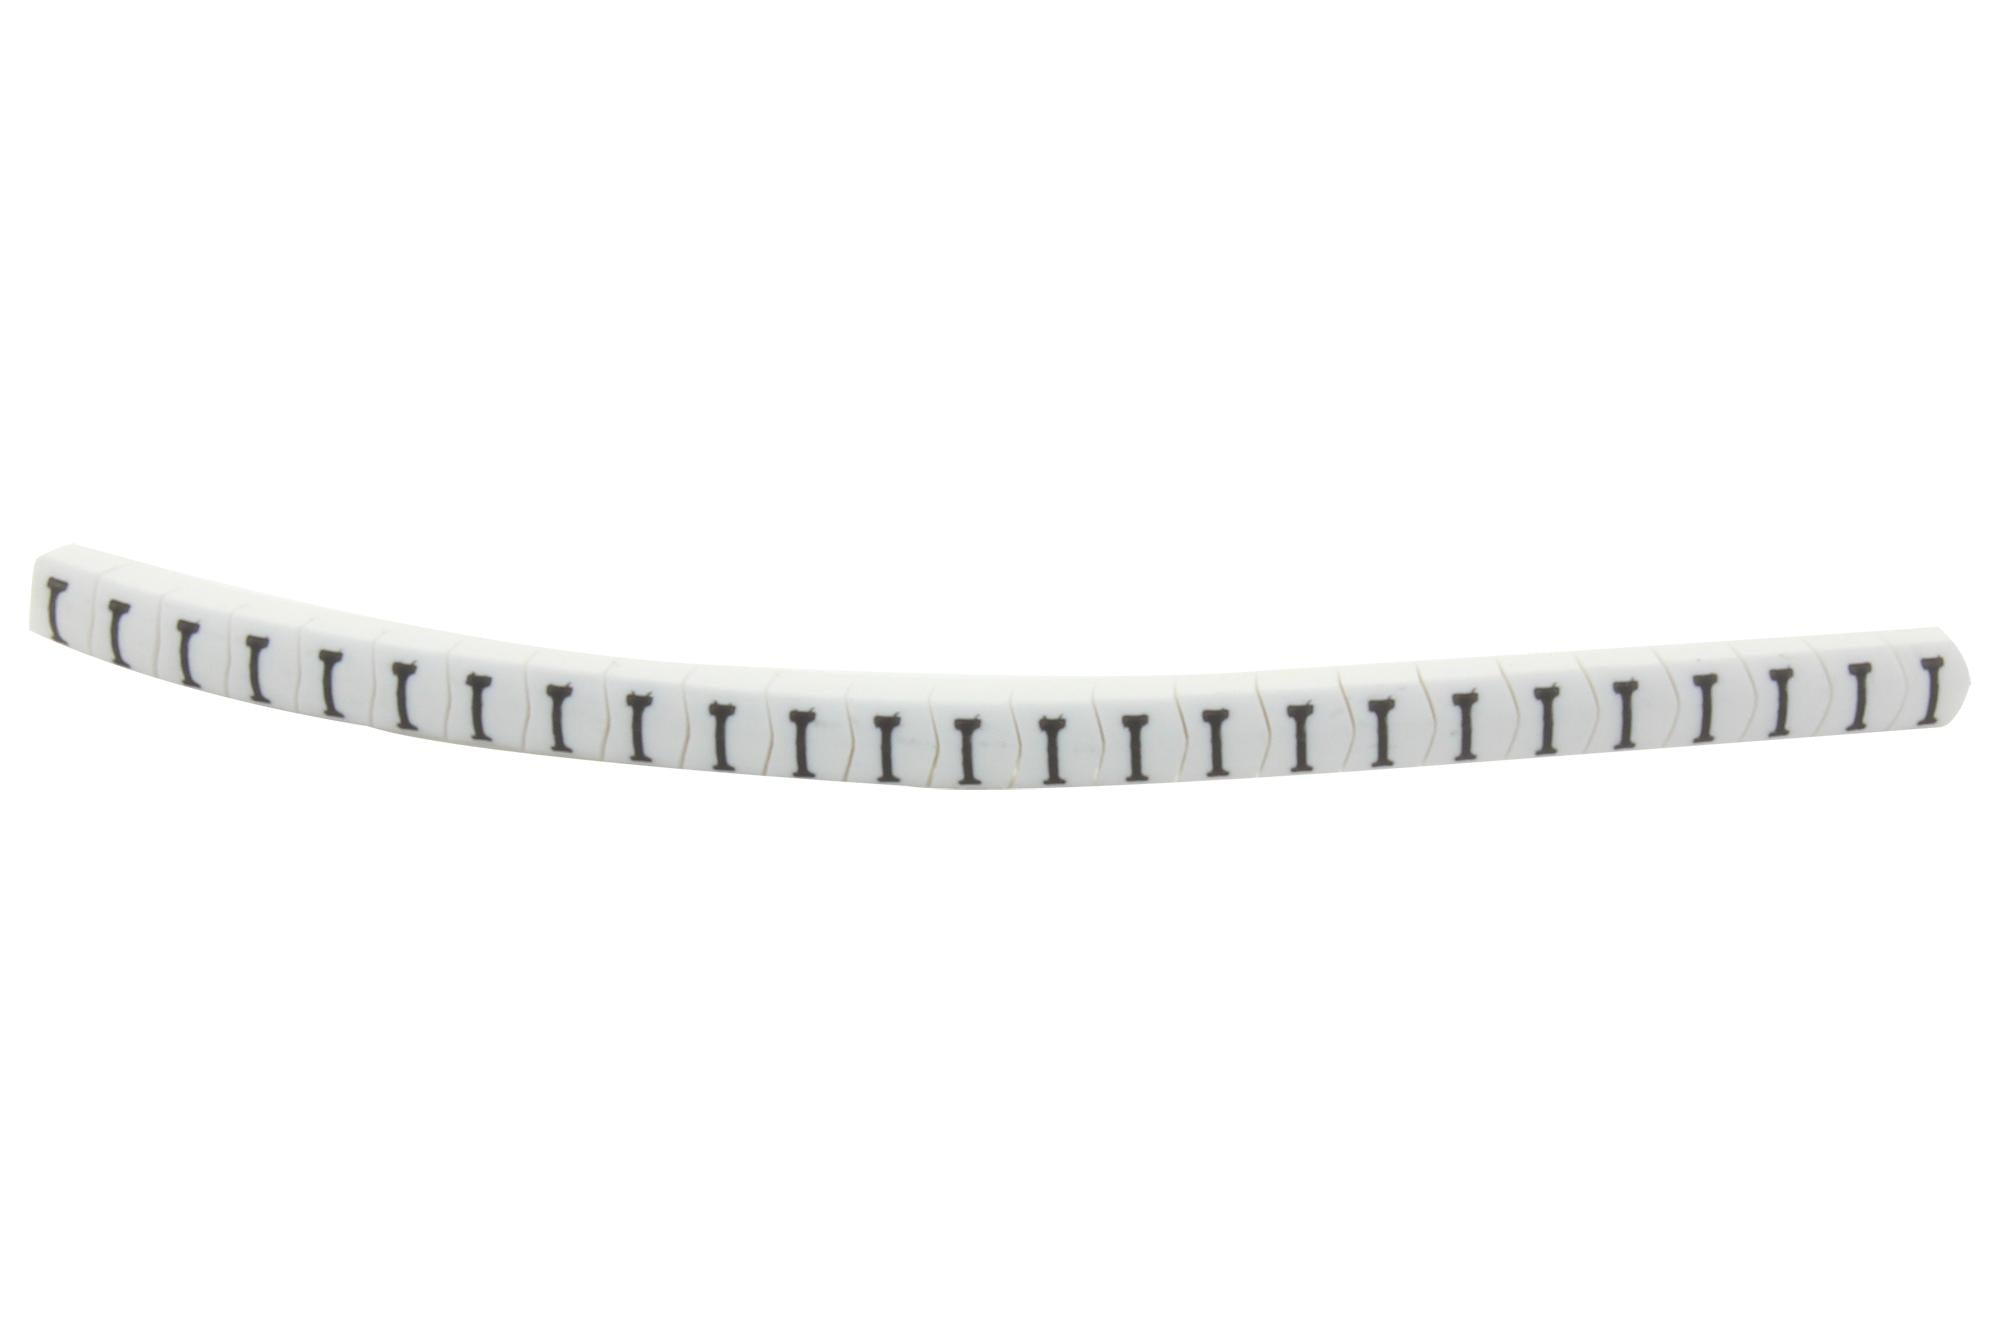 901-11032 CABLE MARKER, PRE PRINTED, PVC, WHITE HELLERMANNTYTON